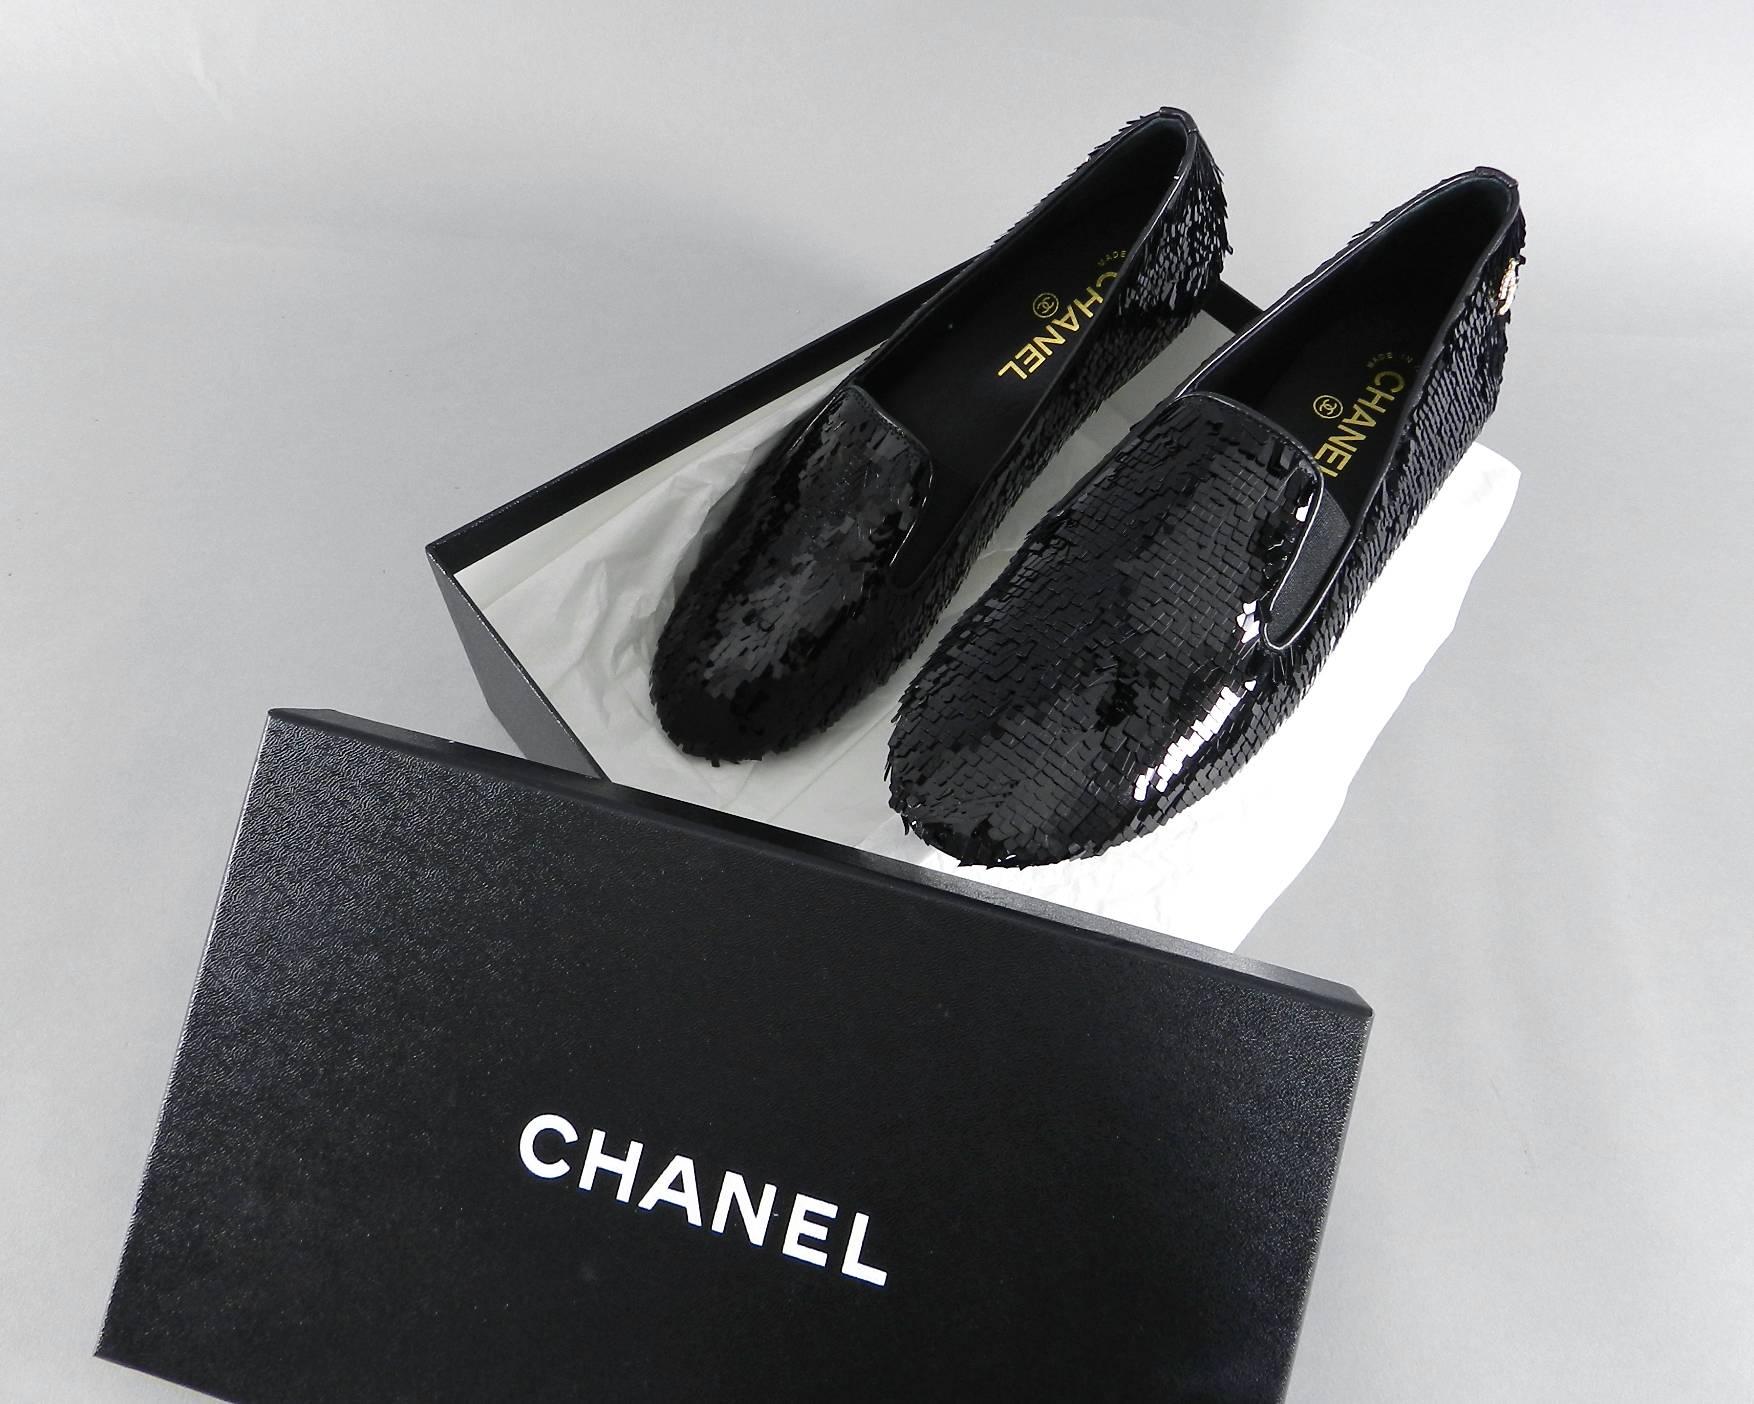 Chanel Lesage Sequin Black Loafers Shoes New in Box.  Gold metal CC logo at back heel. size 41.  Shoes have been tried on indoors.  

We ship worldwide.